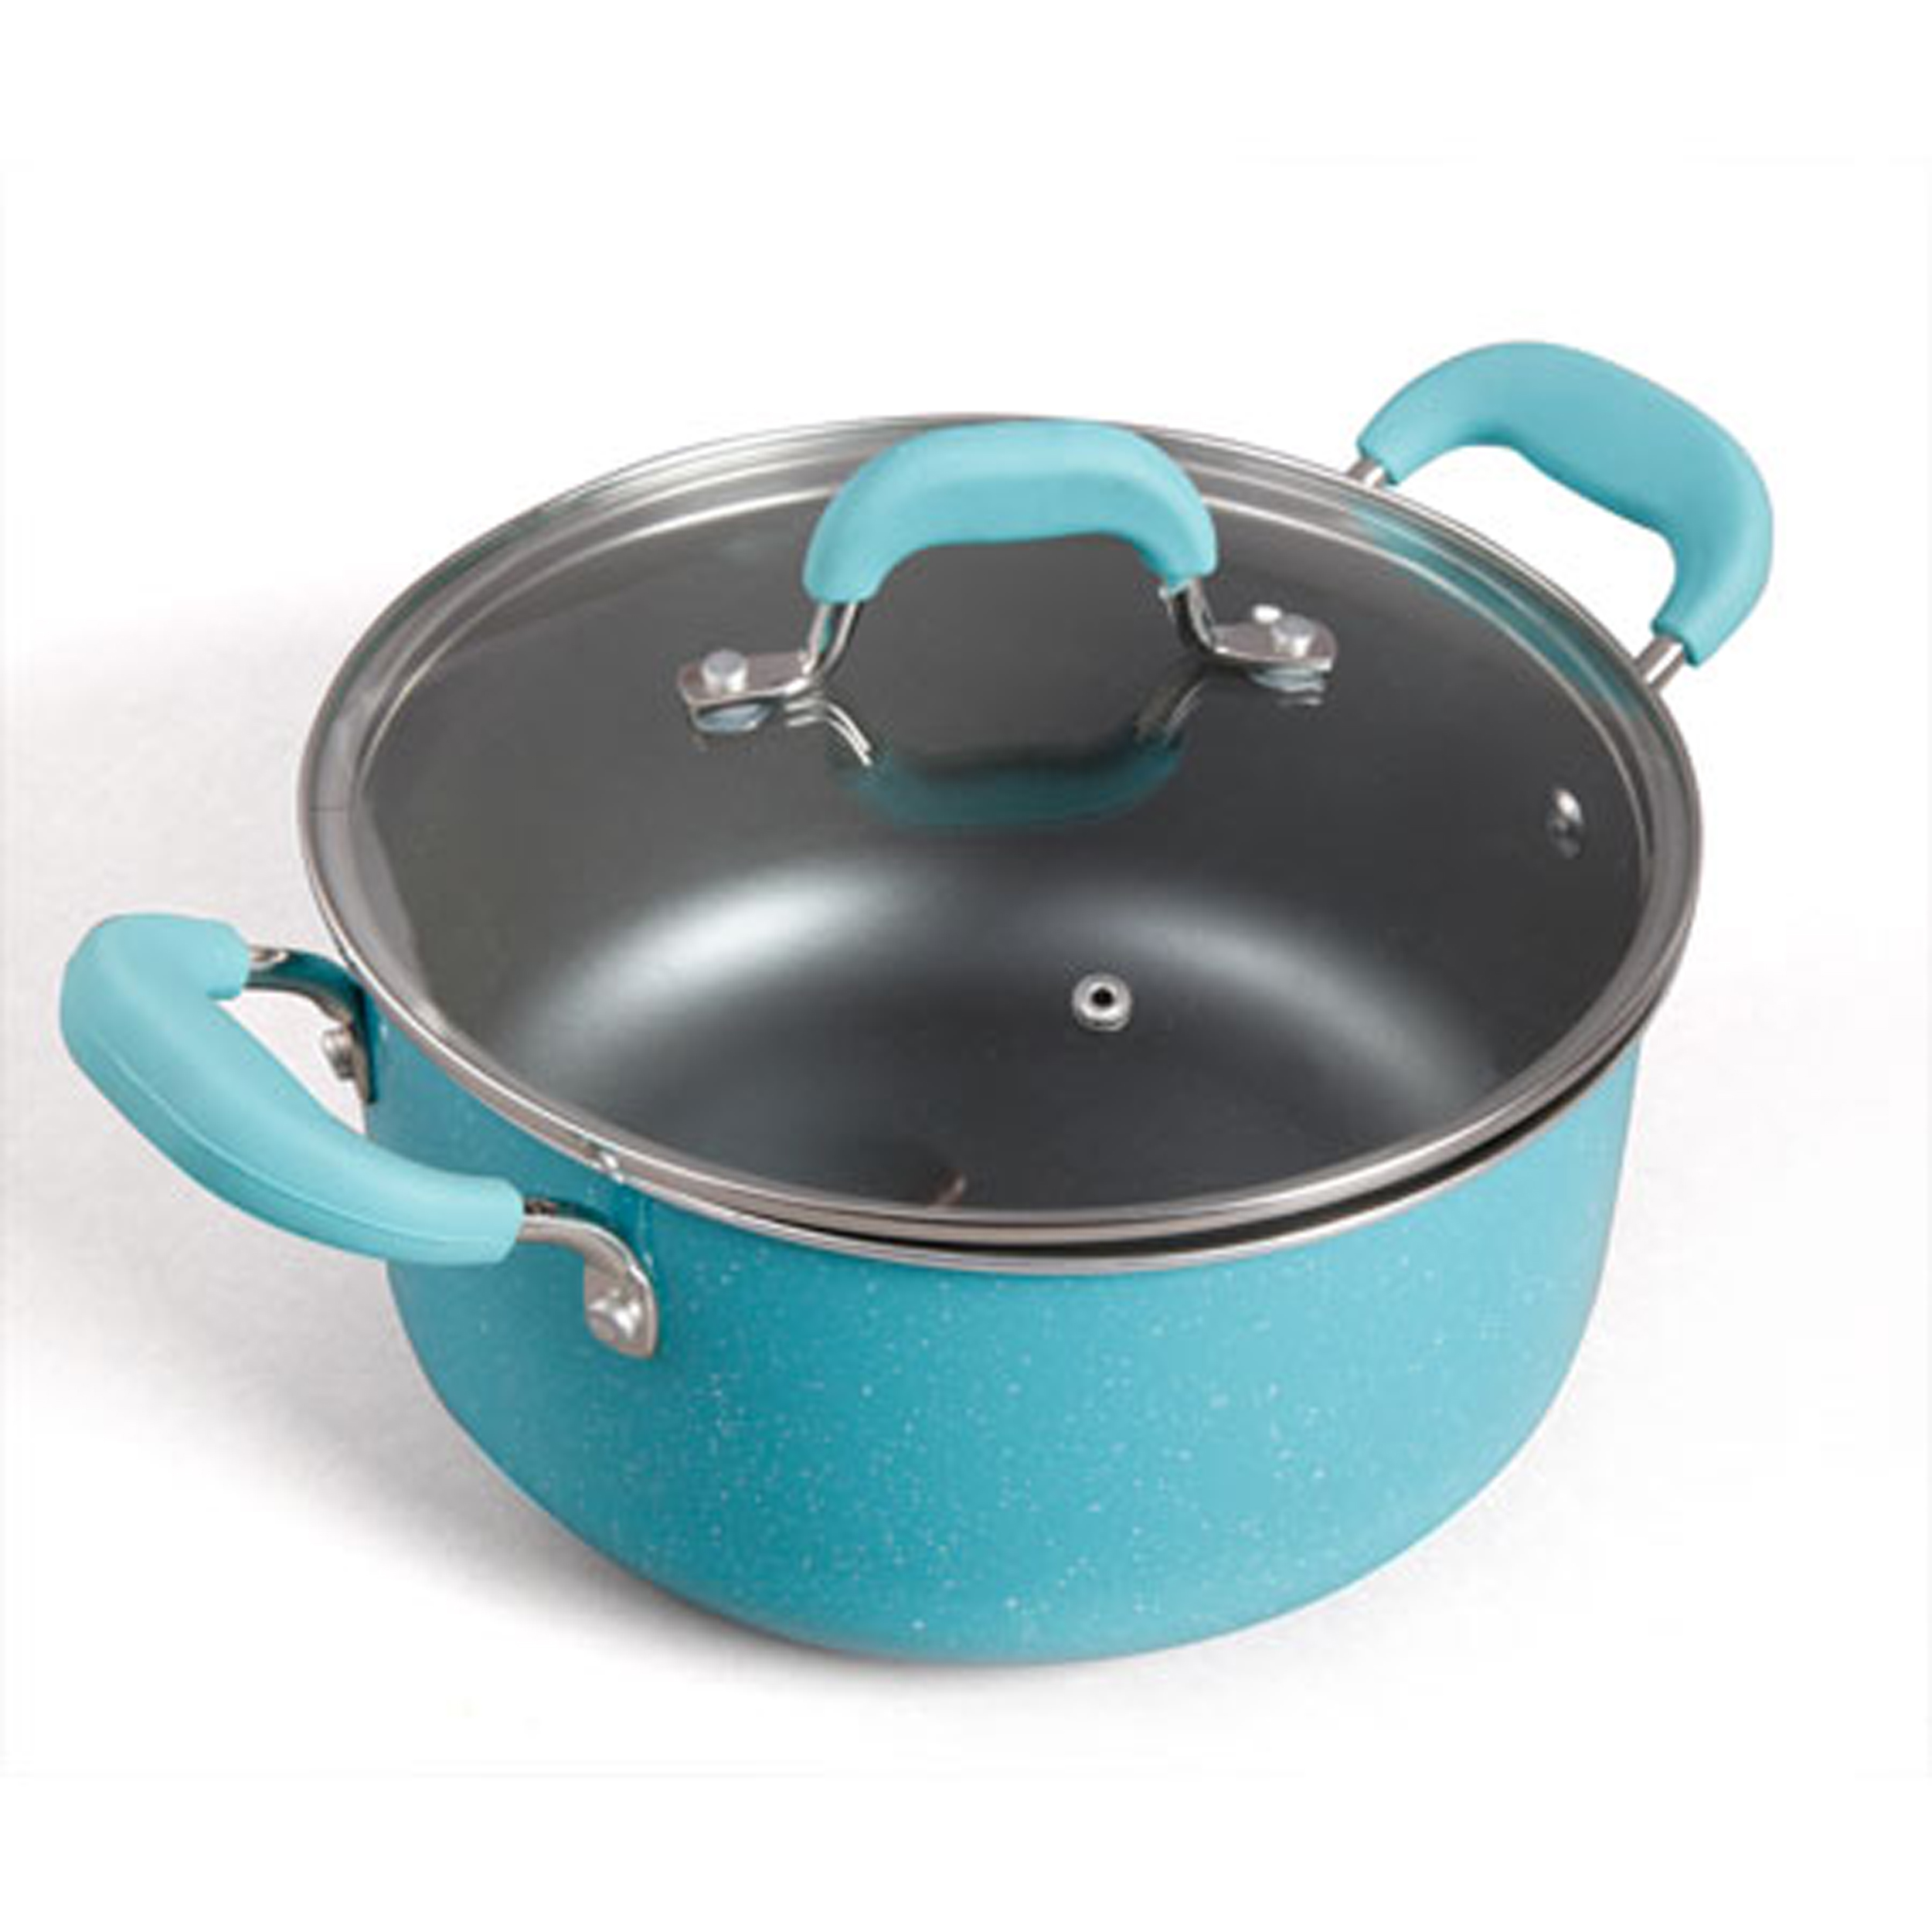 The Pioneer Woman Vintage Speckle & Cast Iron 10-Piece Non-Stick Cookware Set, Turquoise - image 4 of 10